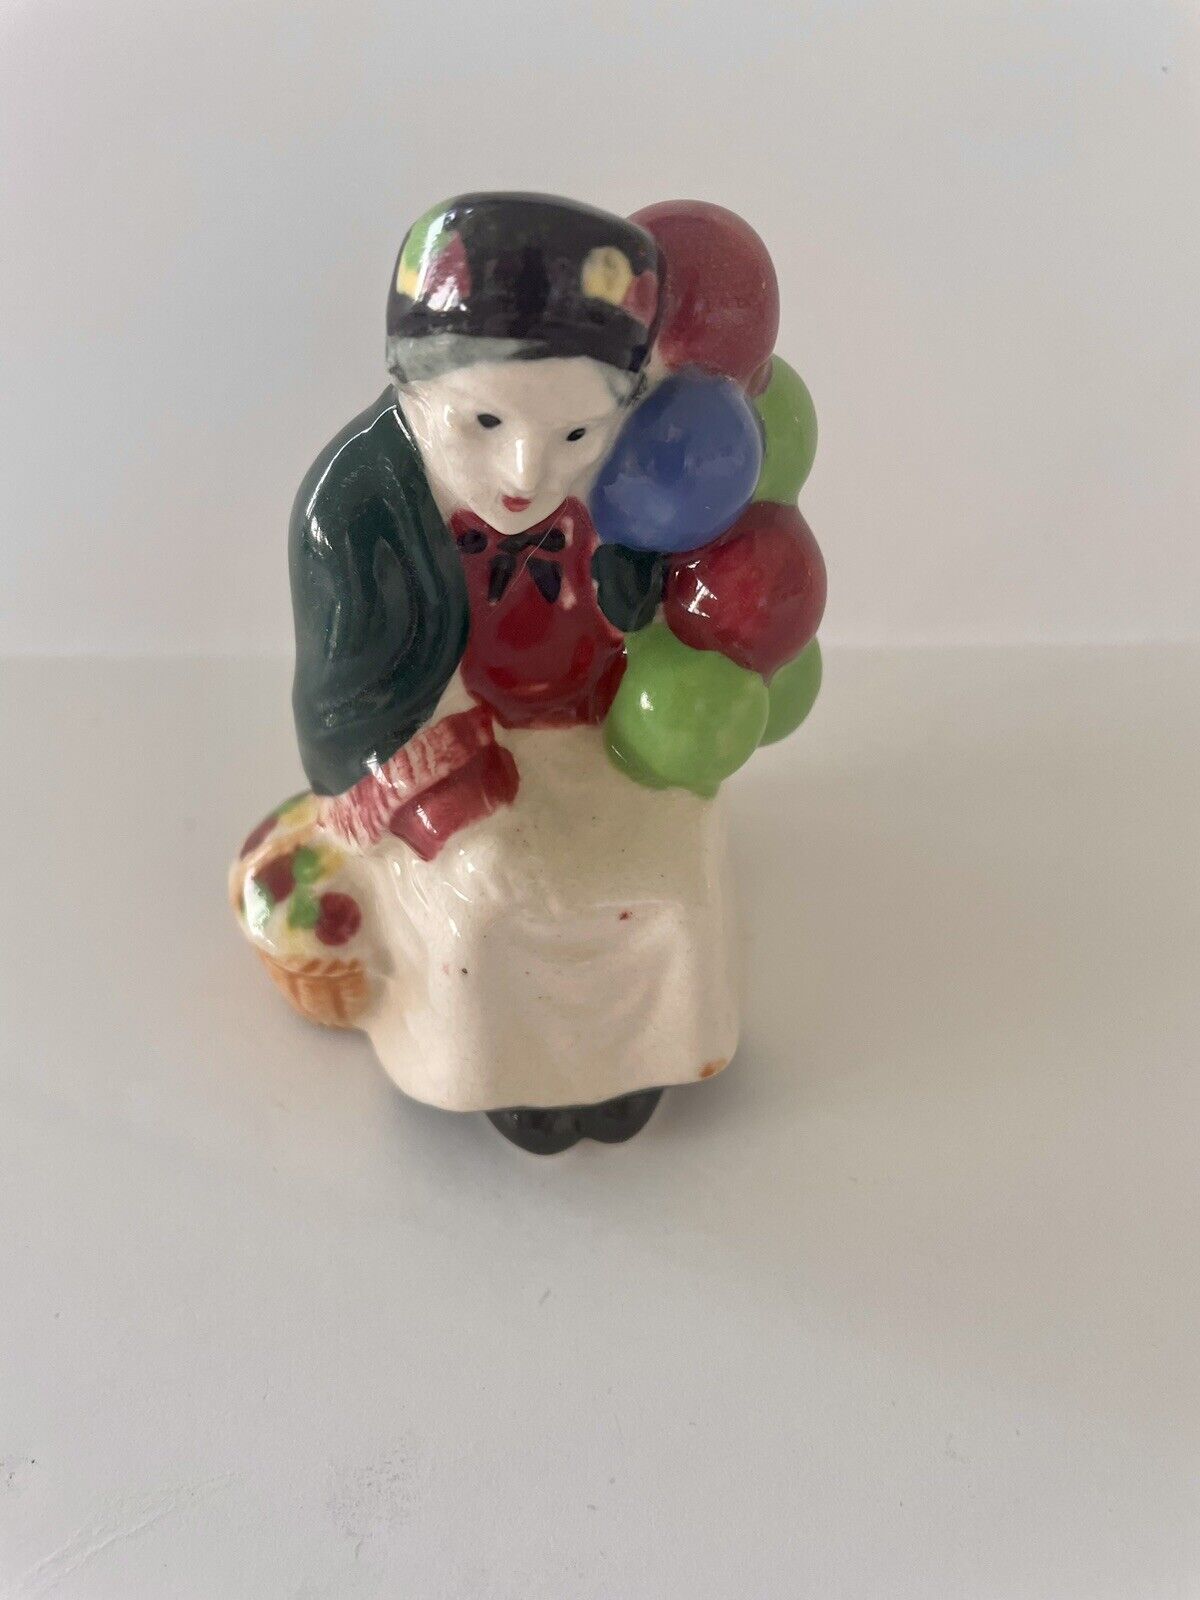 Old Balloon Lady  Mini 3 1/2 Inches. Vintage Occupied Japan 1945-52